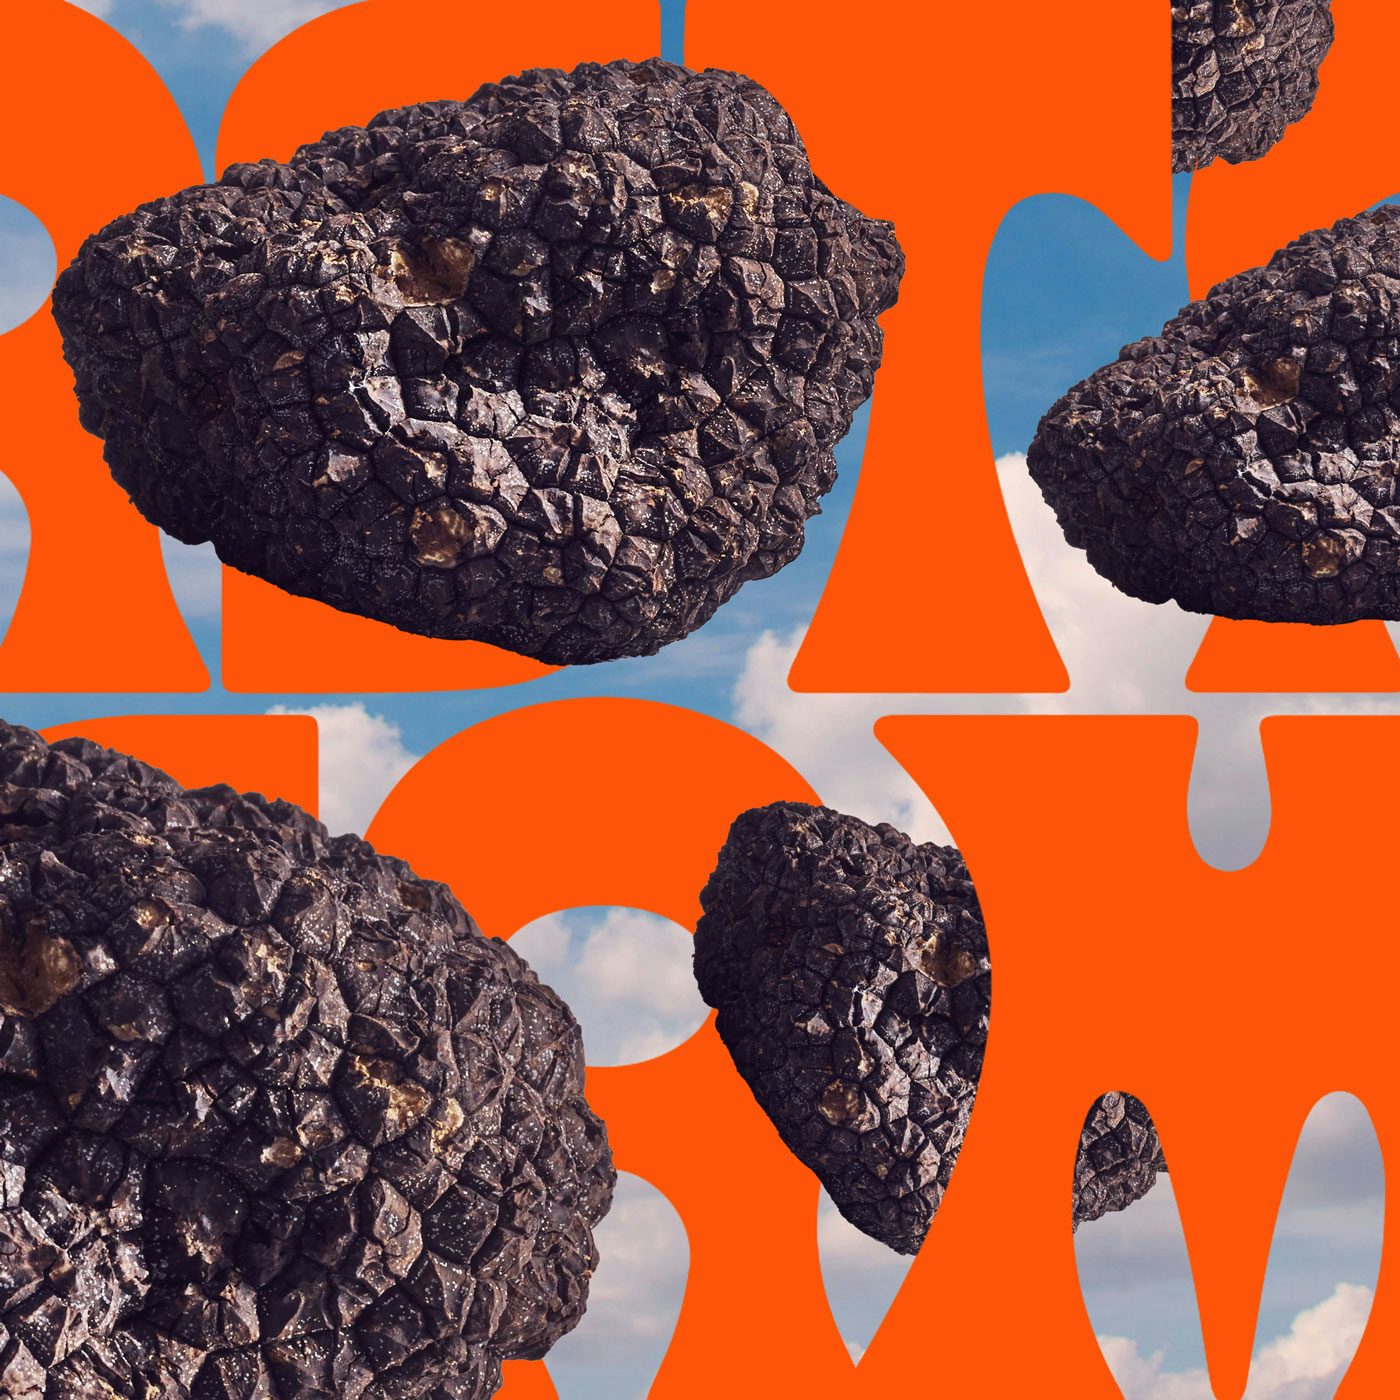 Image shows a cut-out graphic of truffles against a patterned background